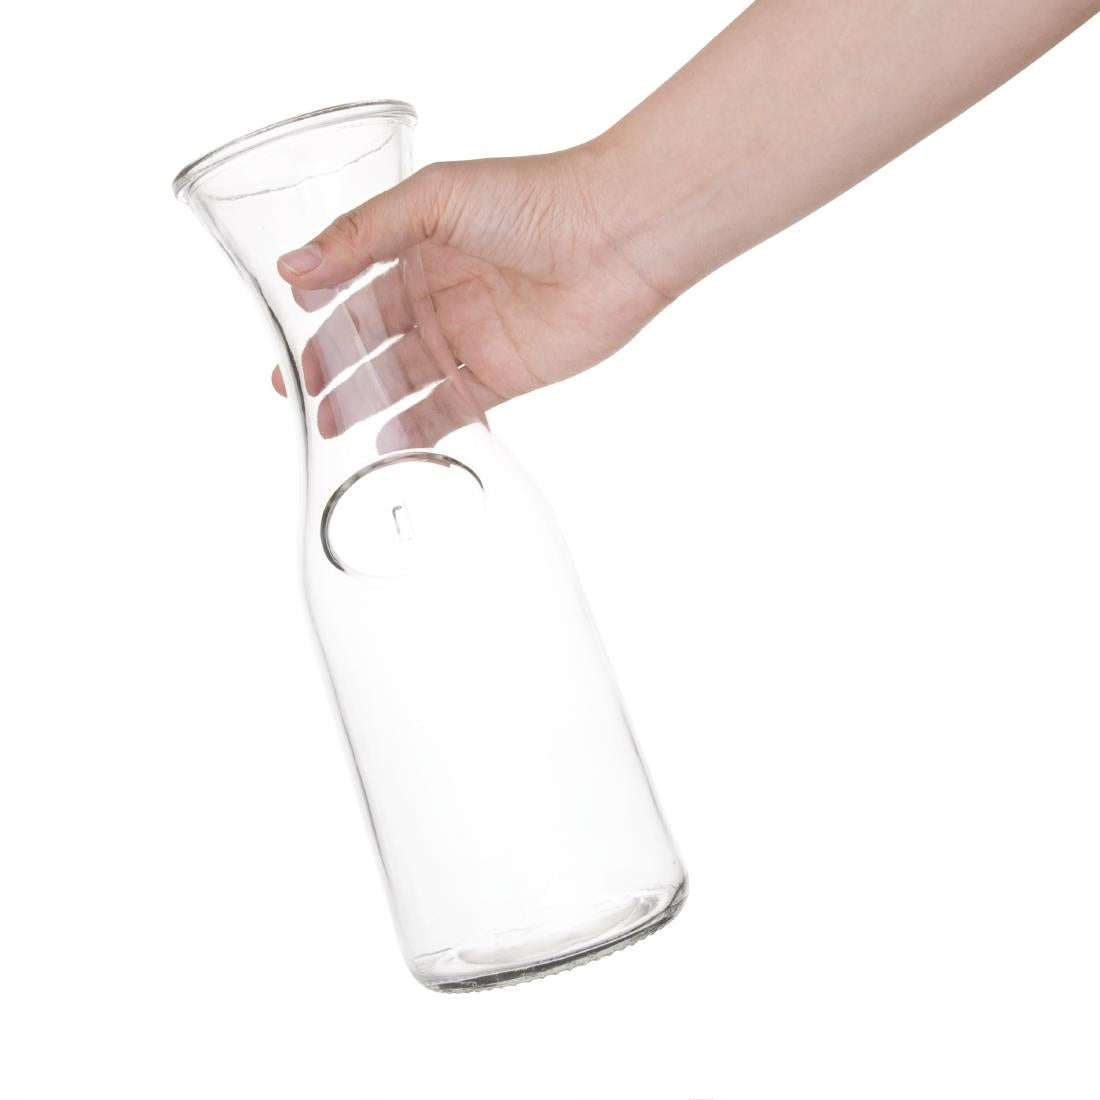 GG928 Olympia Glass Carafe 1Ltr (Pack of 6) JD Catering Equipment Solutions Ltd